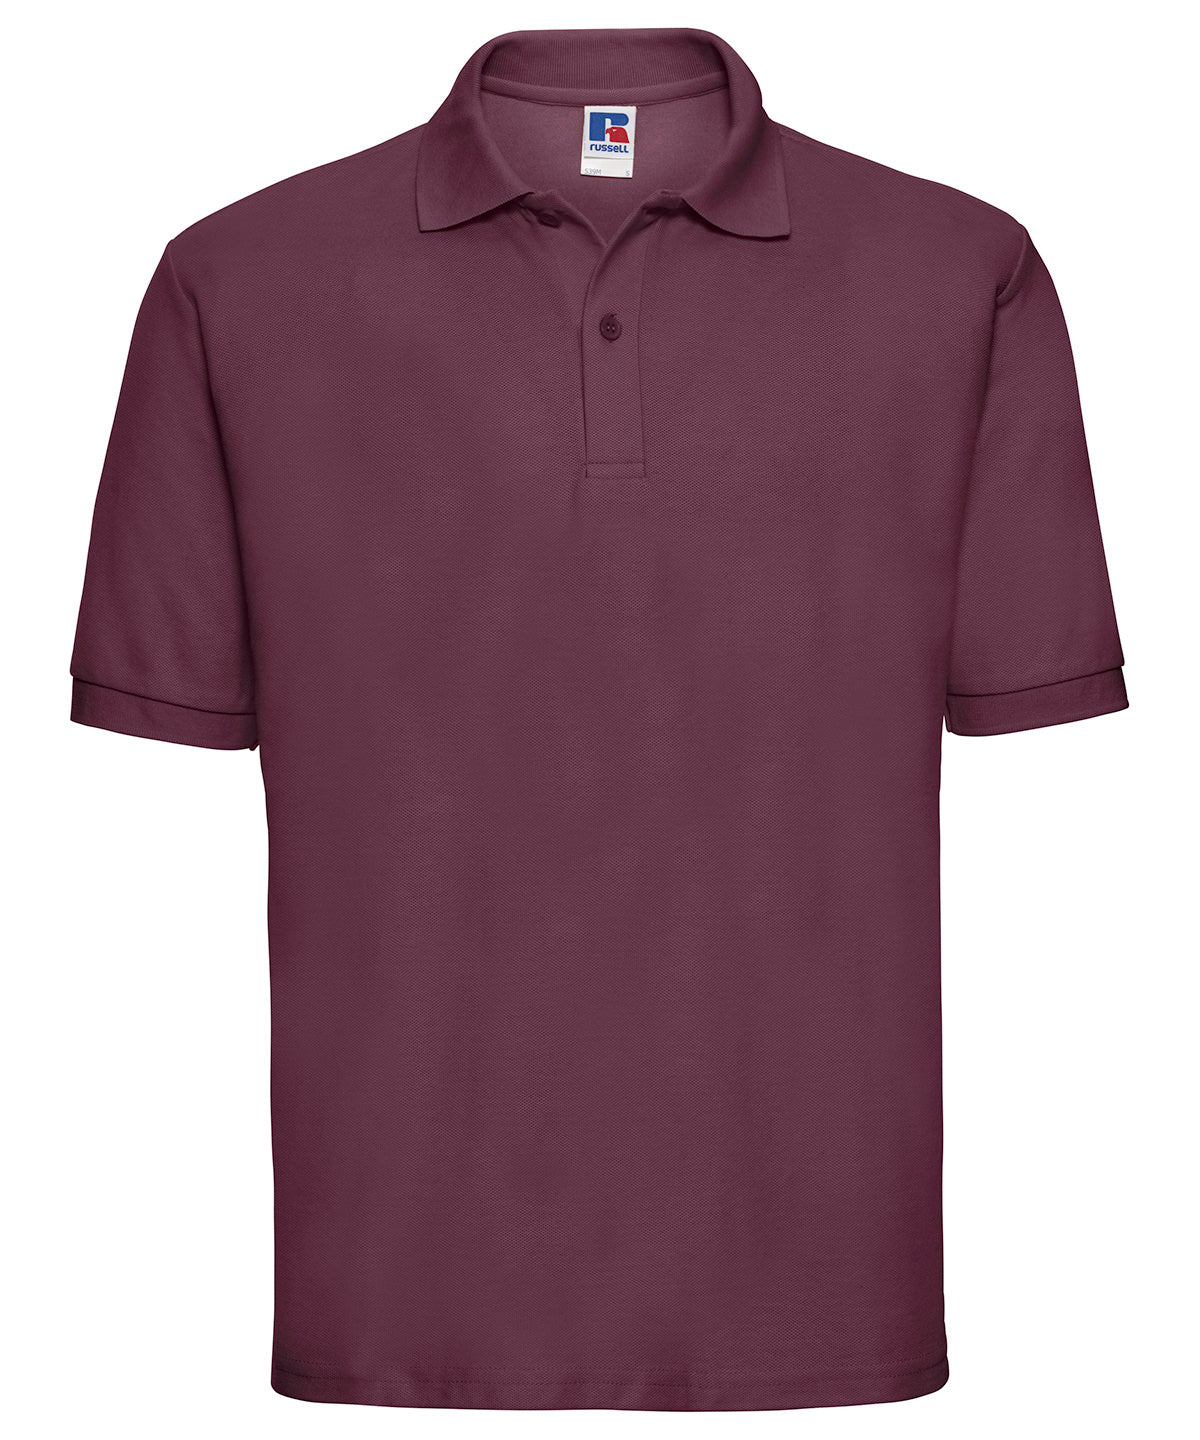 Russell Classic Polycotton Polo Burgundy